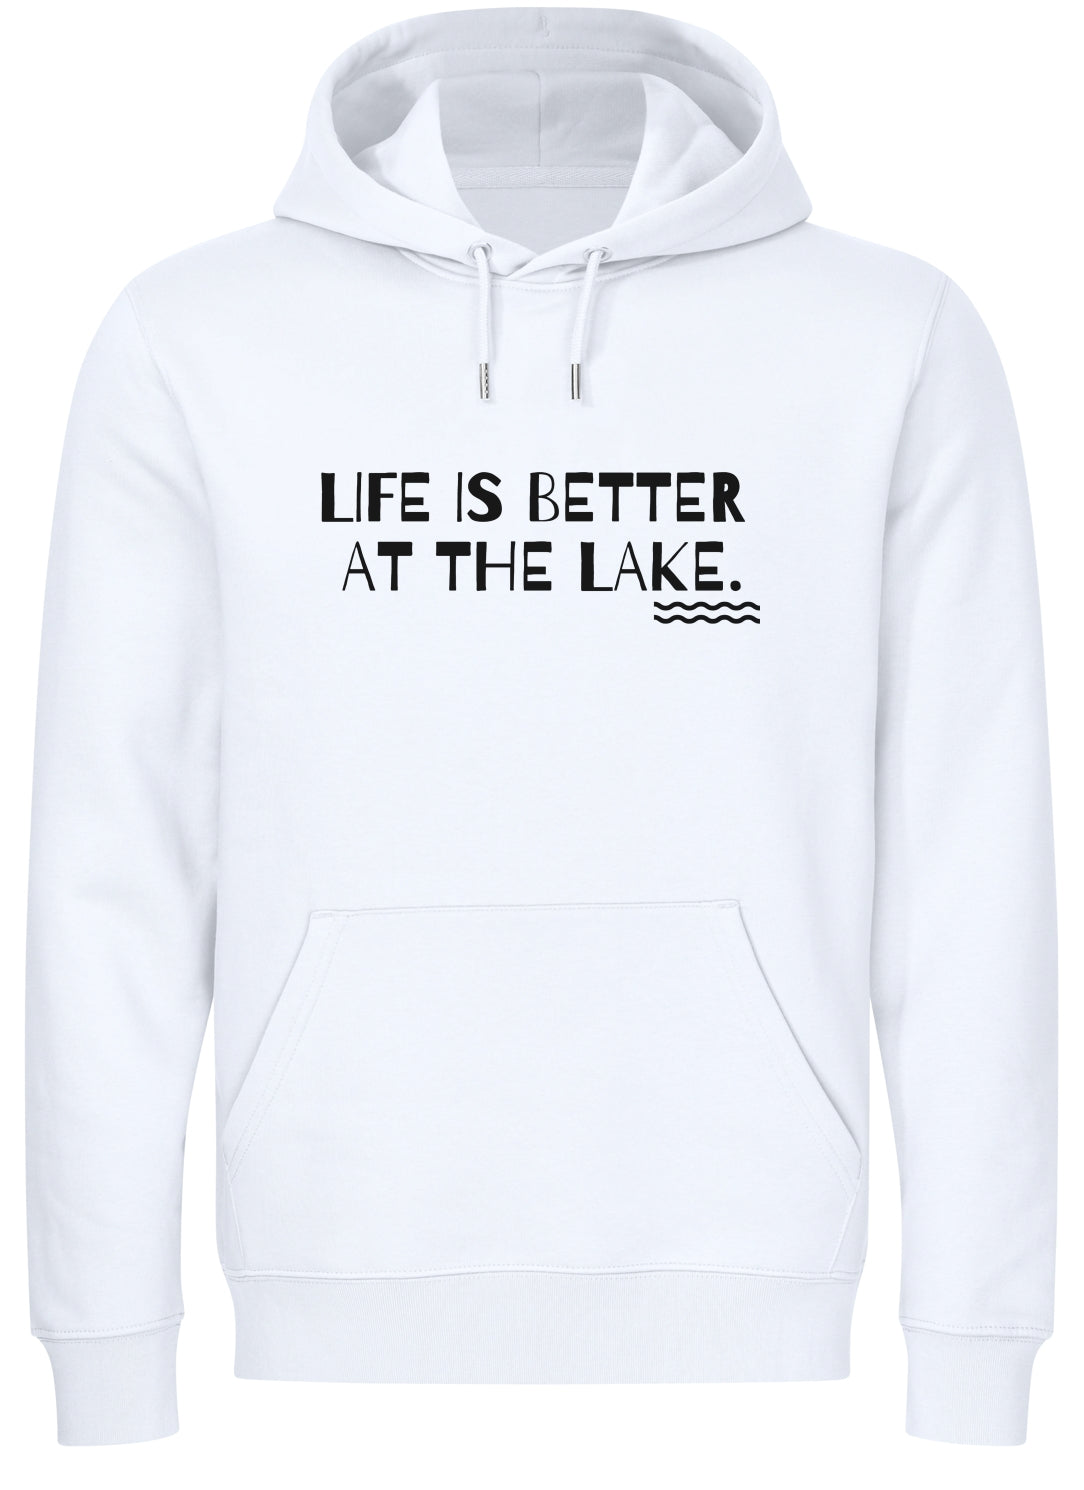 Life is better at the lake (Unisex)